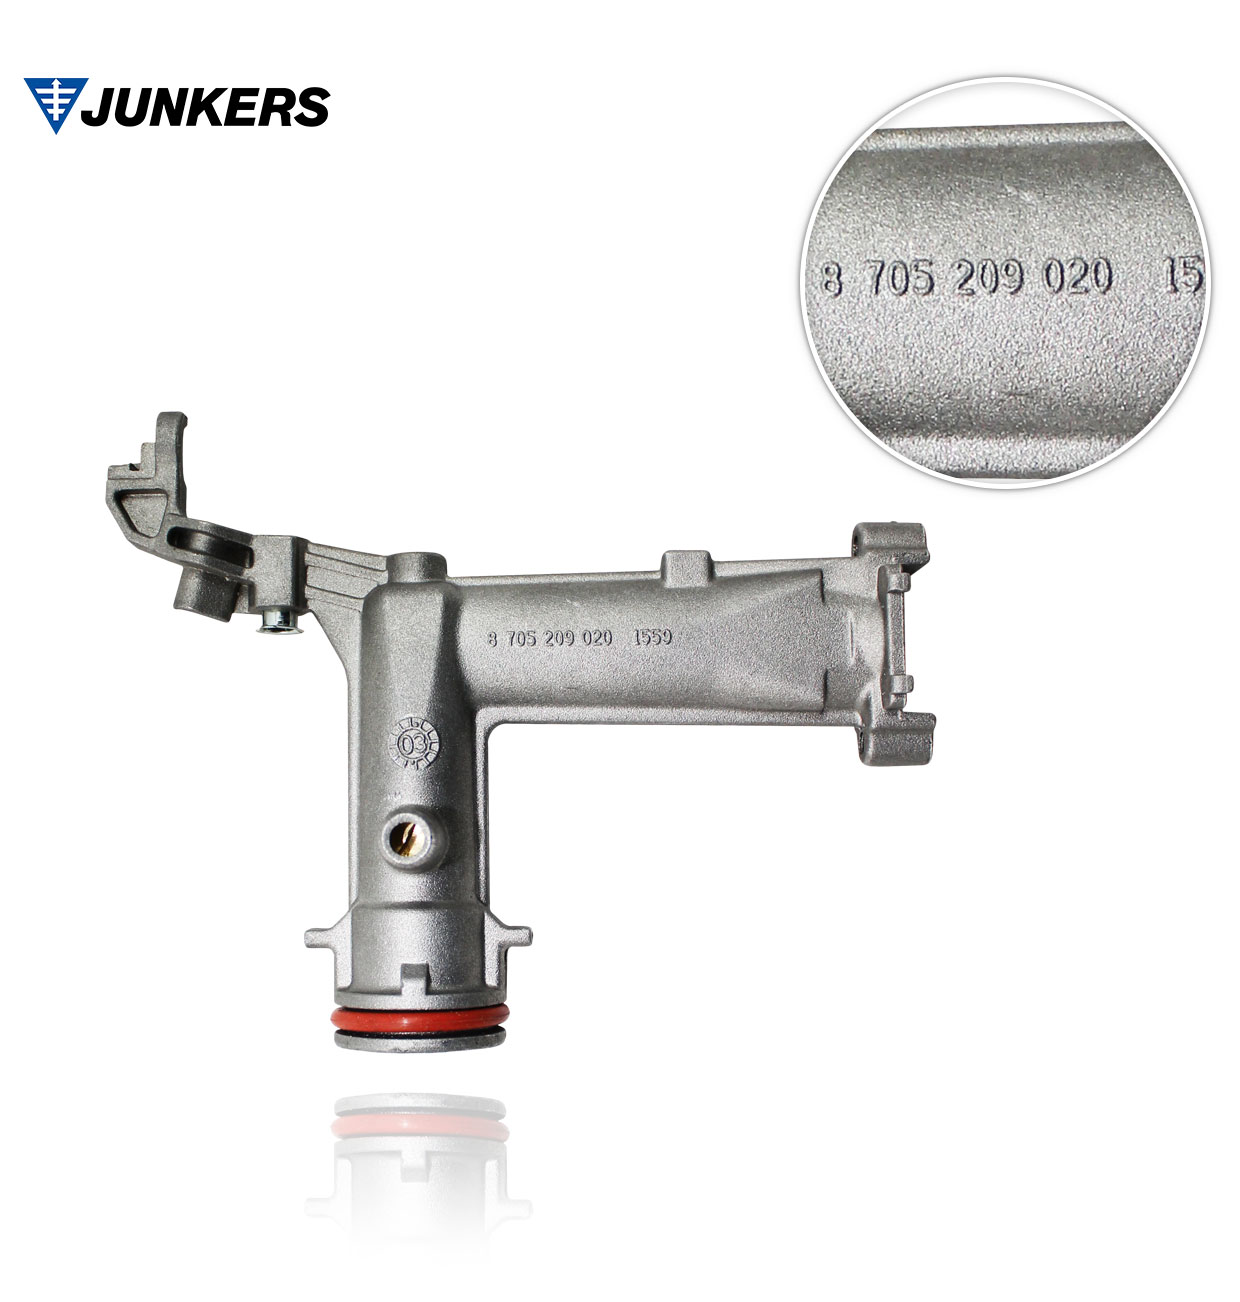 JUNKERS 8705209018 GAS FITTING